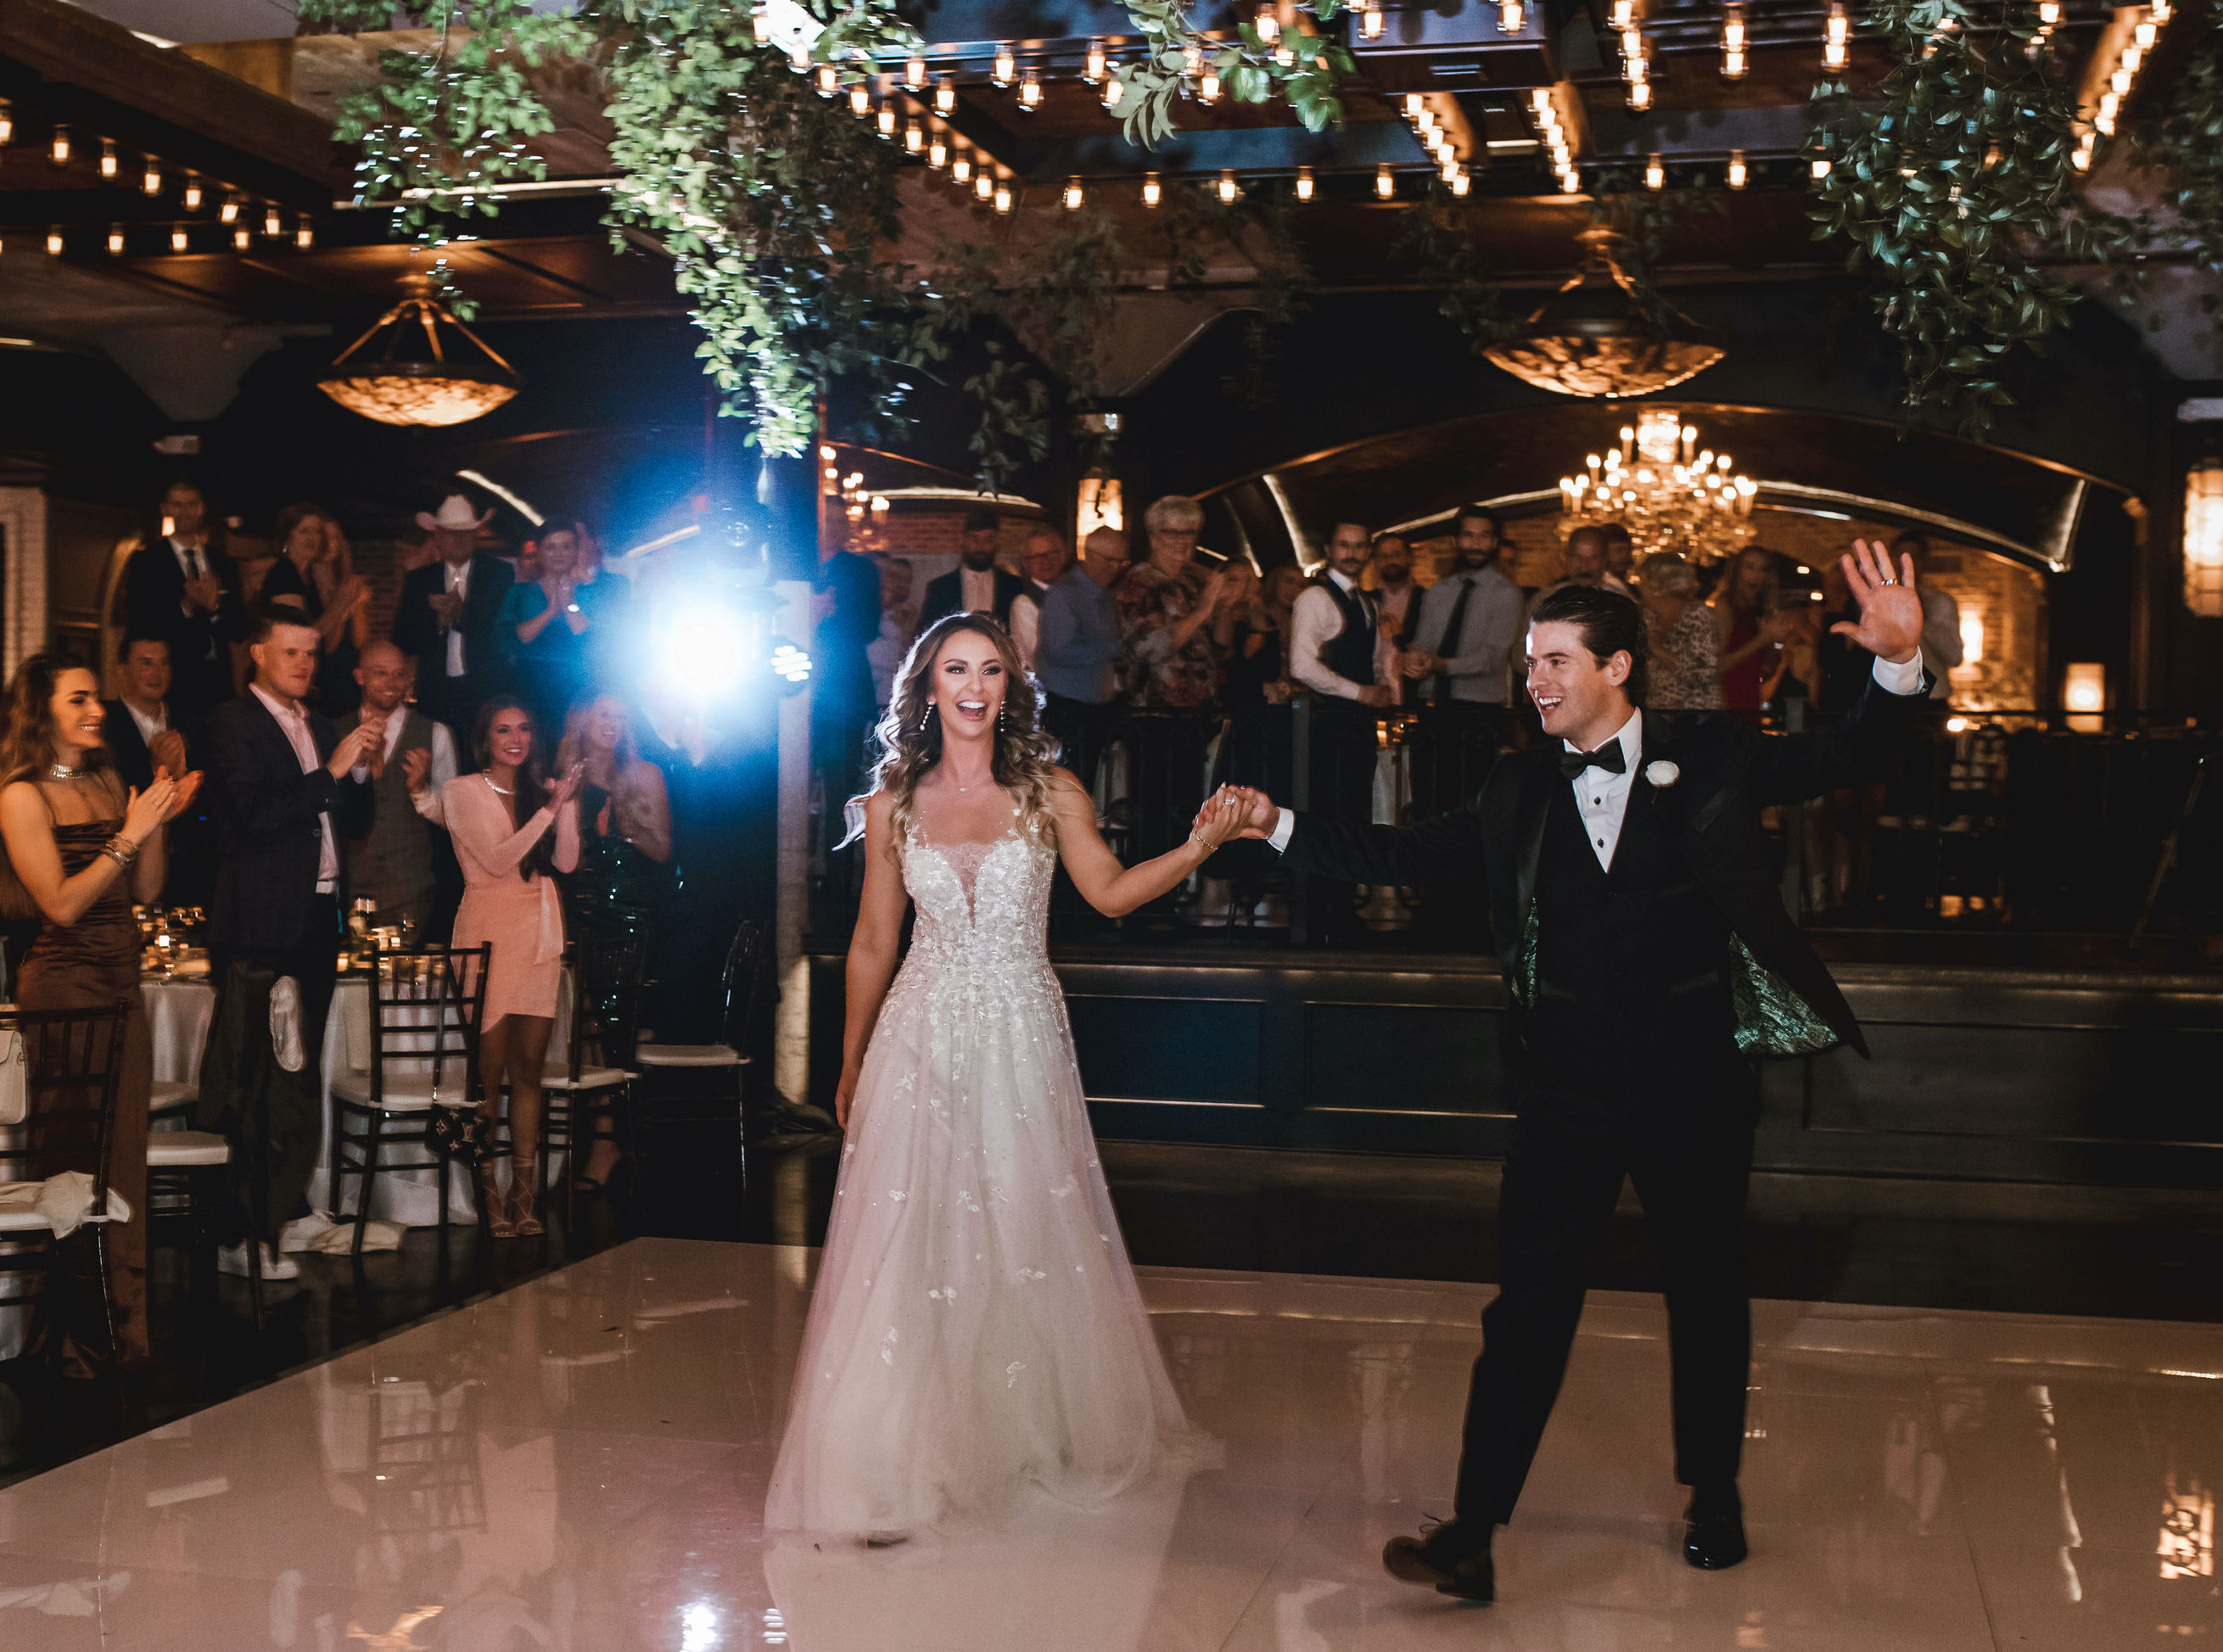 The bride and groom wave to their wedding guests as they head to the middle of the dance floor at their wedding reception at The Astorian in Houston, TX. They have their first dance and celebrate their love story at The Astorian.